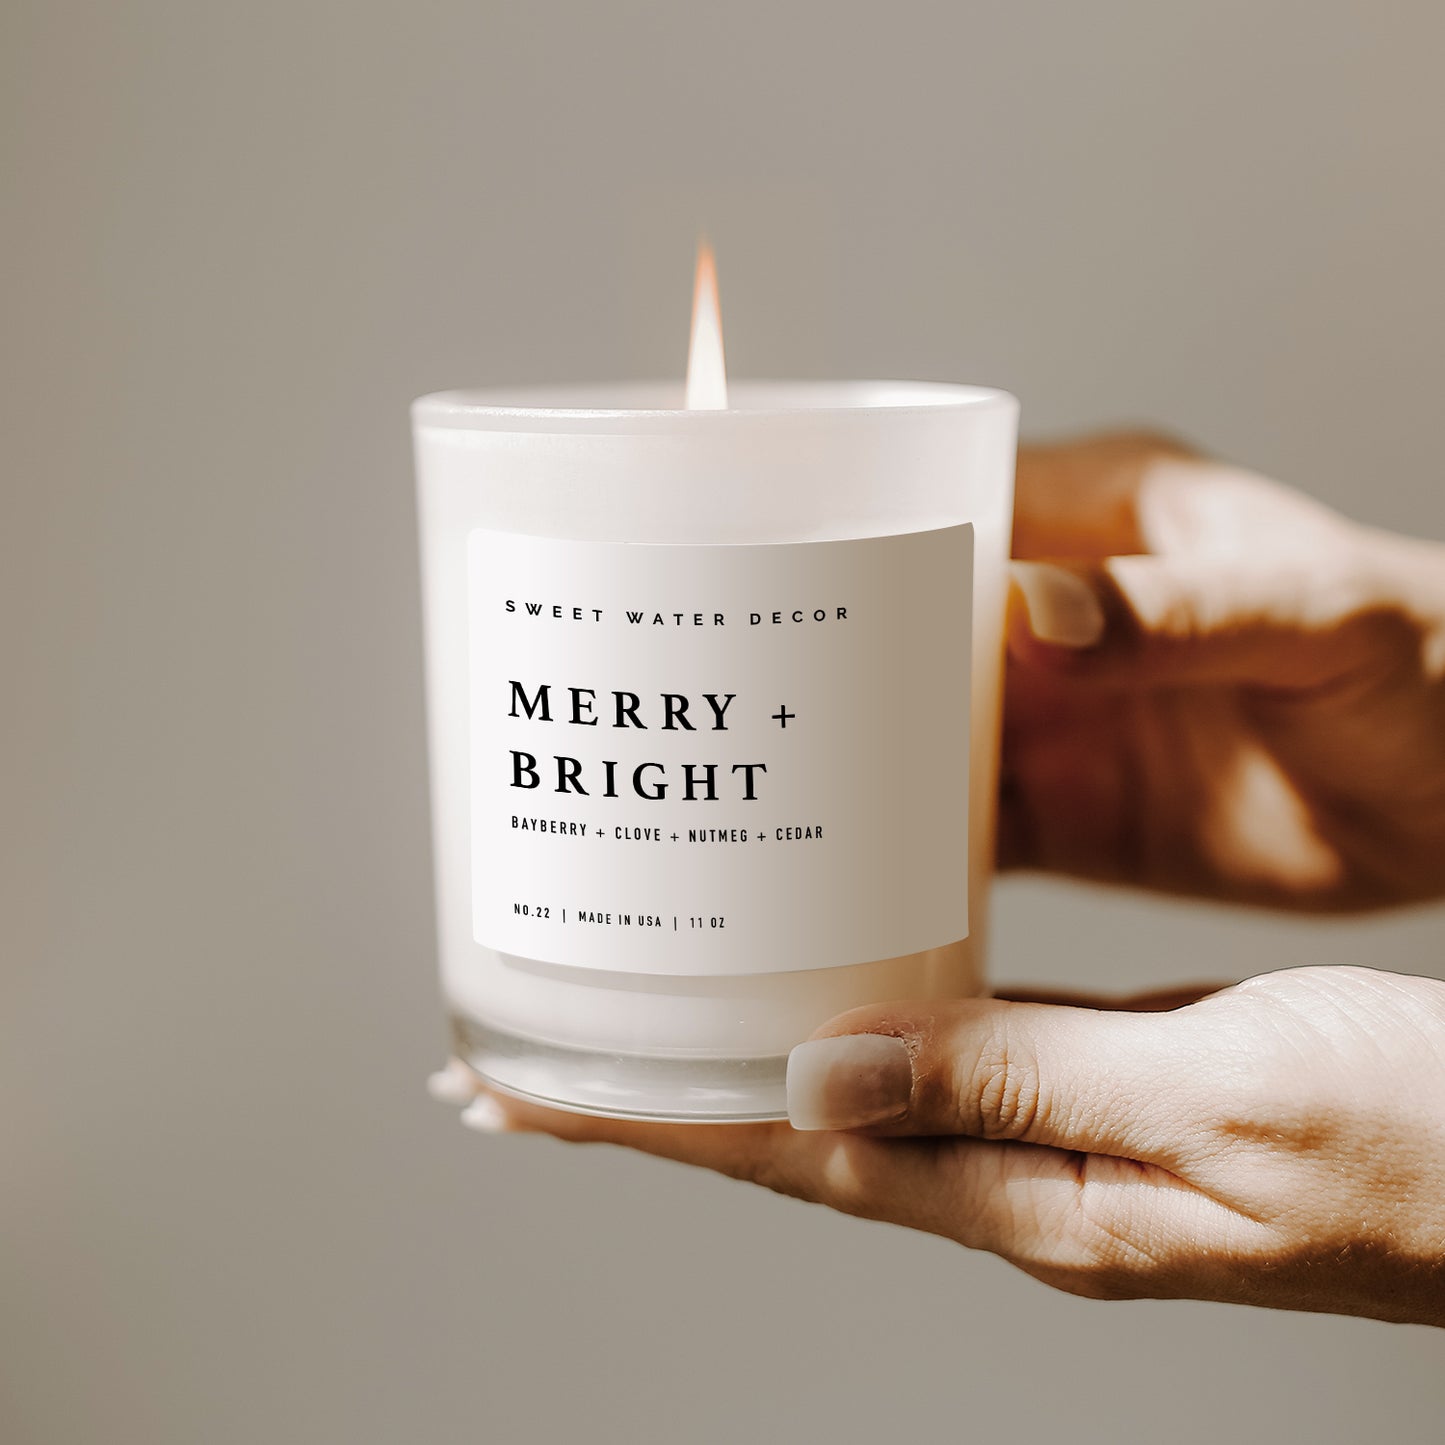 MERRY + BRIGHT CANDLE | 11 OZ